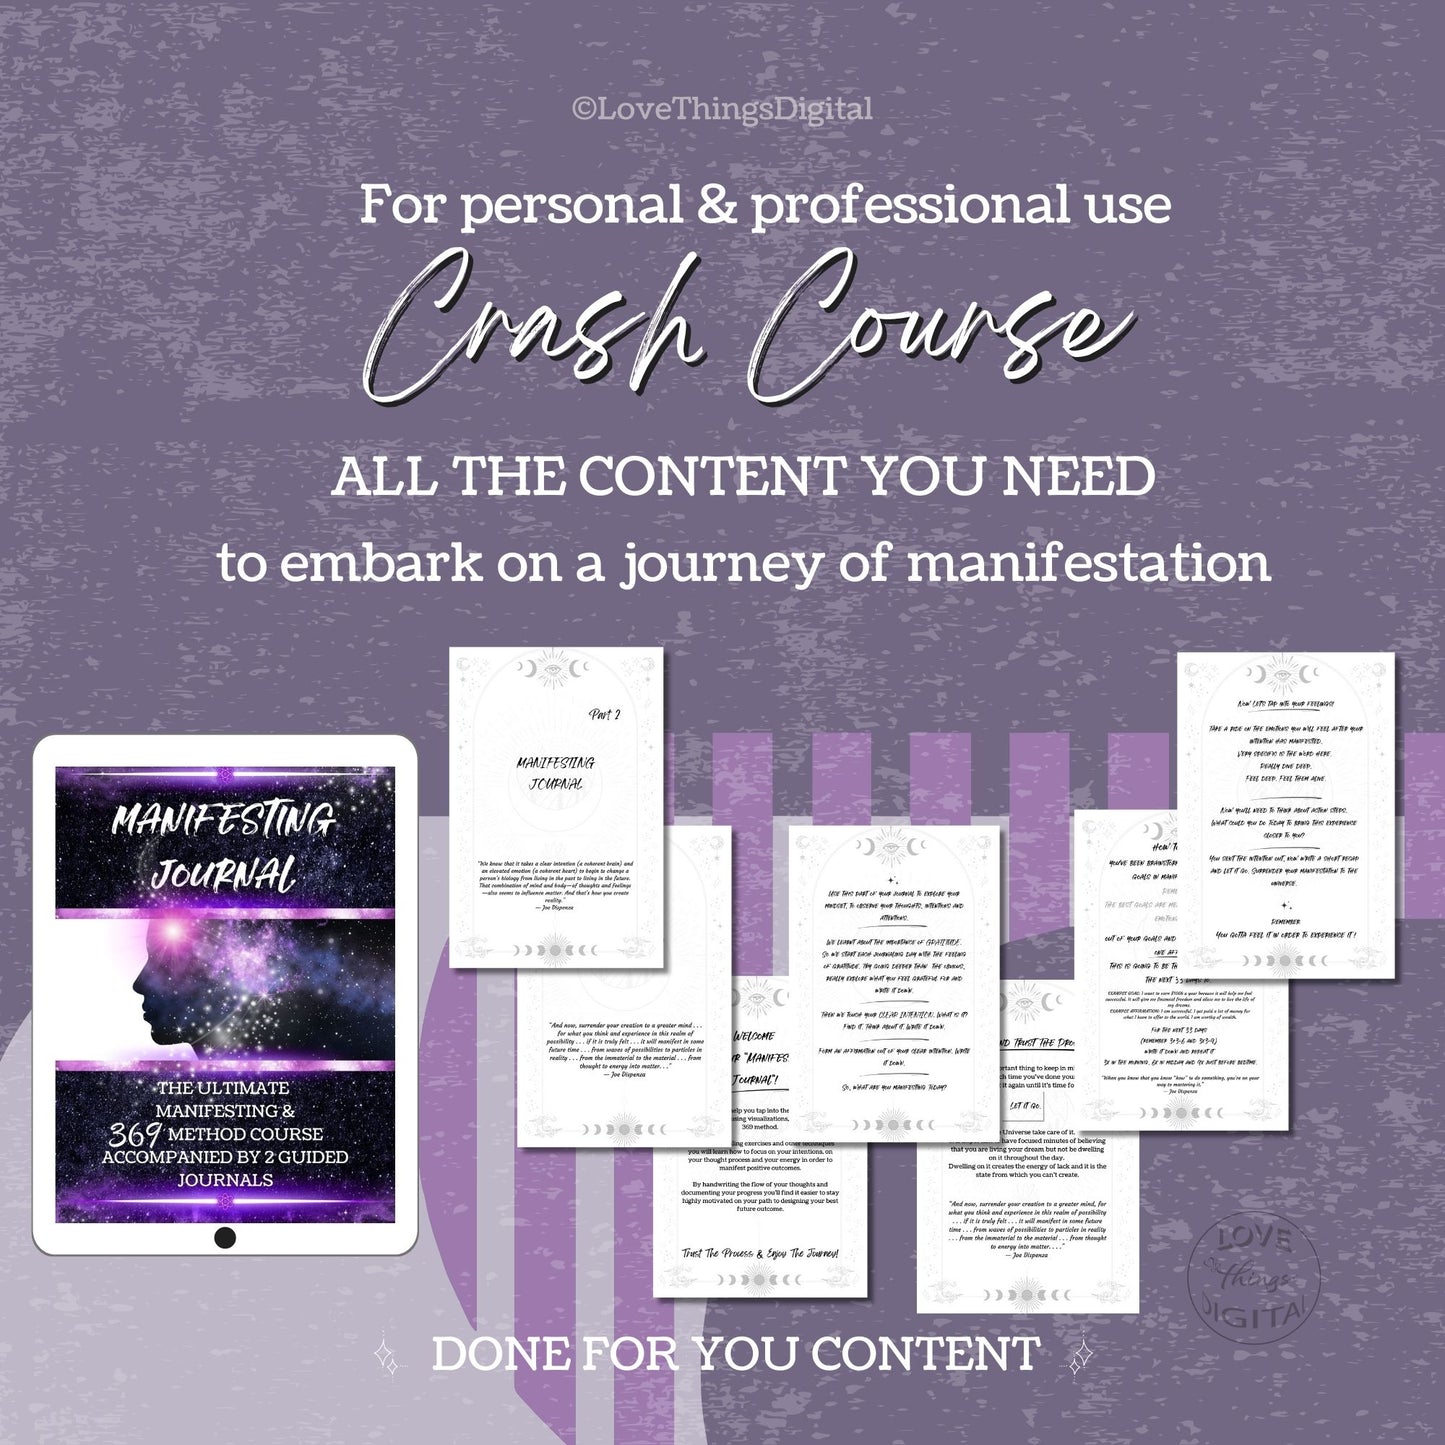 The Ultimate Manifestation And 369 Method Course With 2 Guided Journals